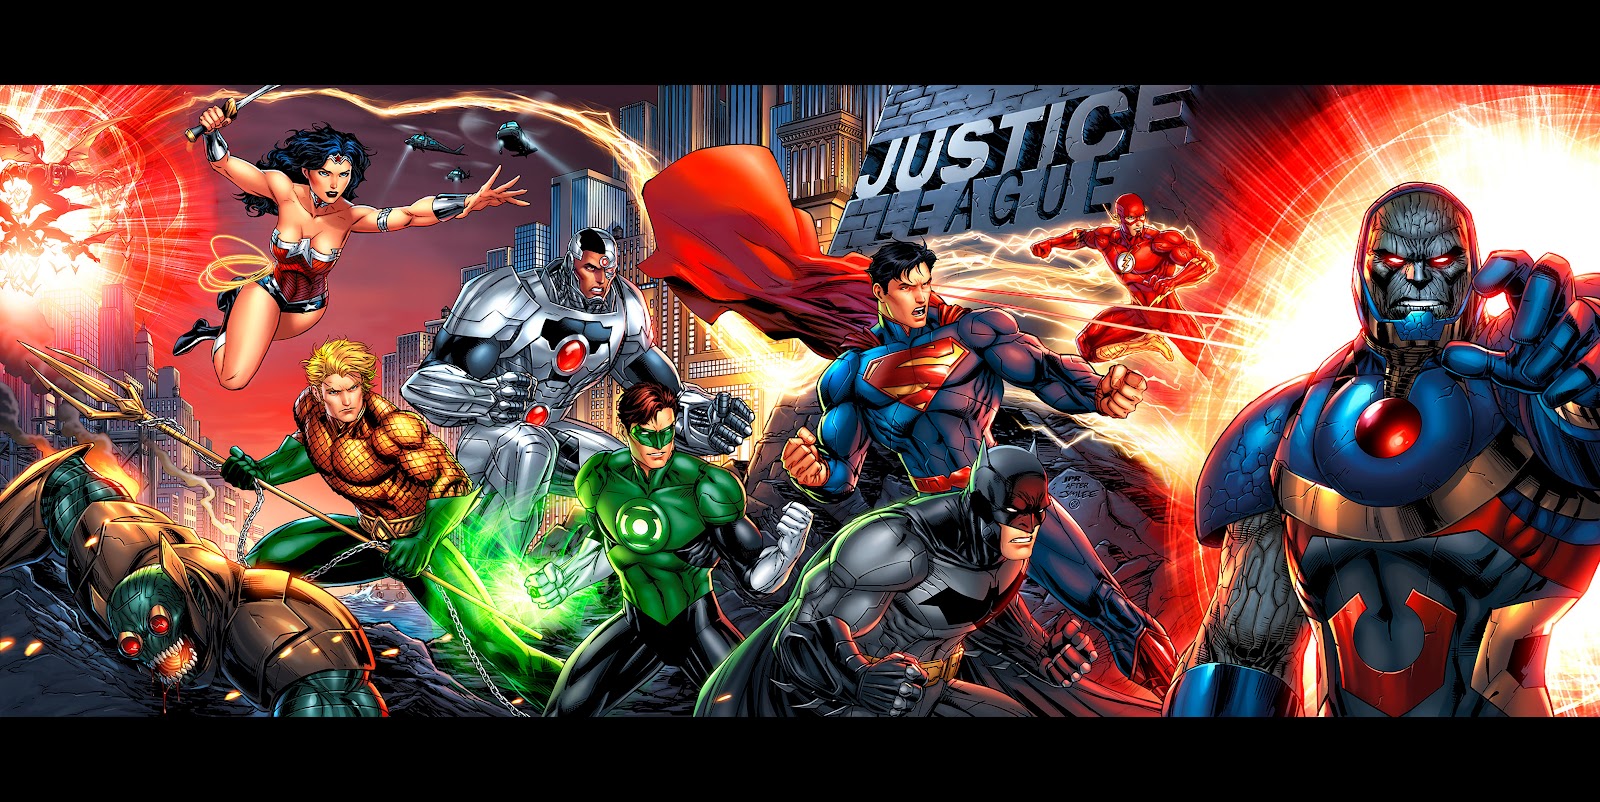 The Wallpapers of Superman and the New 52 Justice League above are by